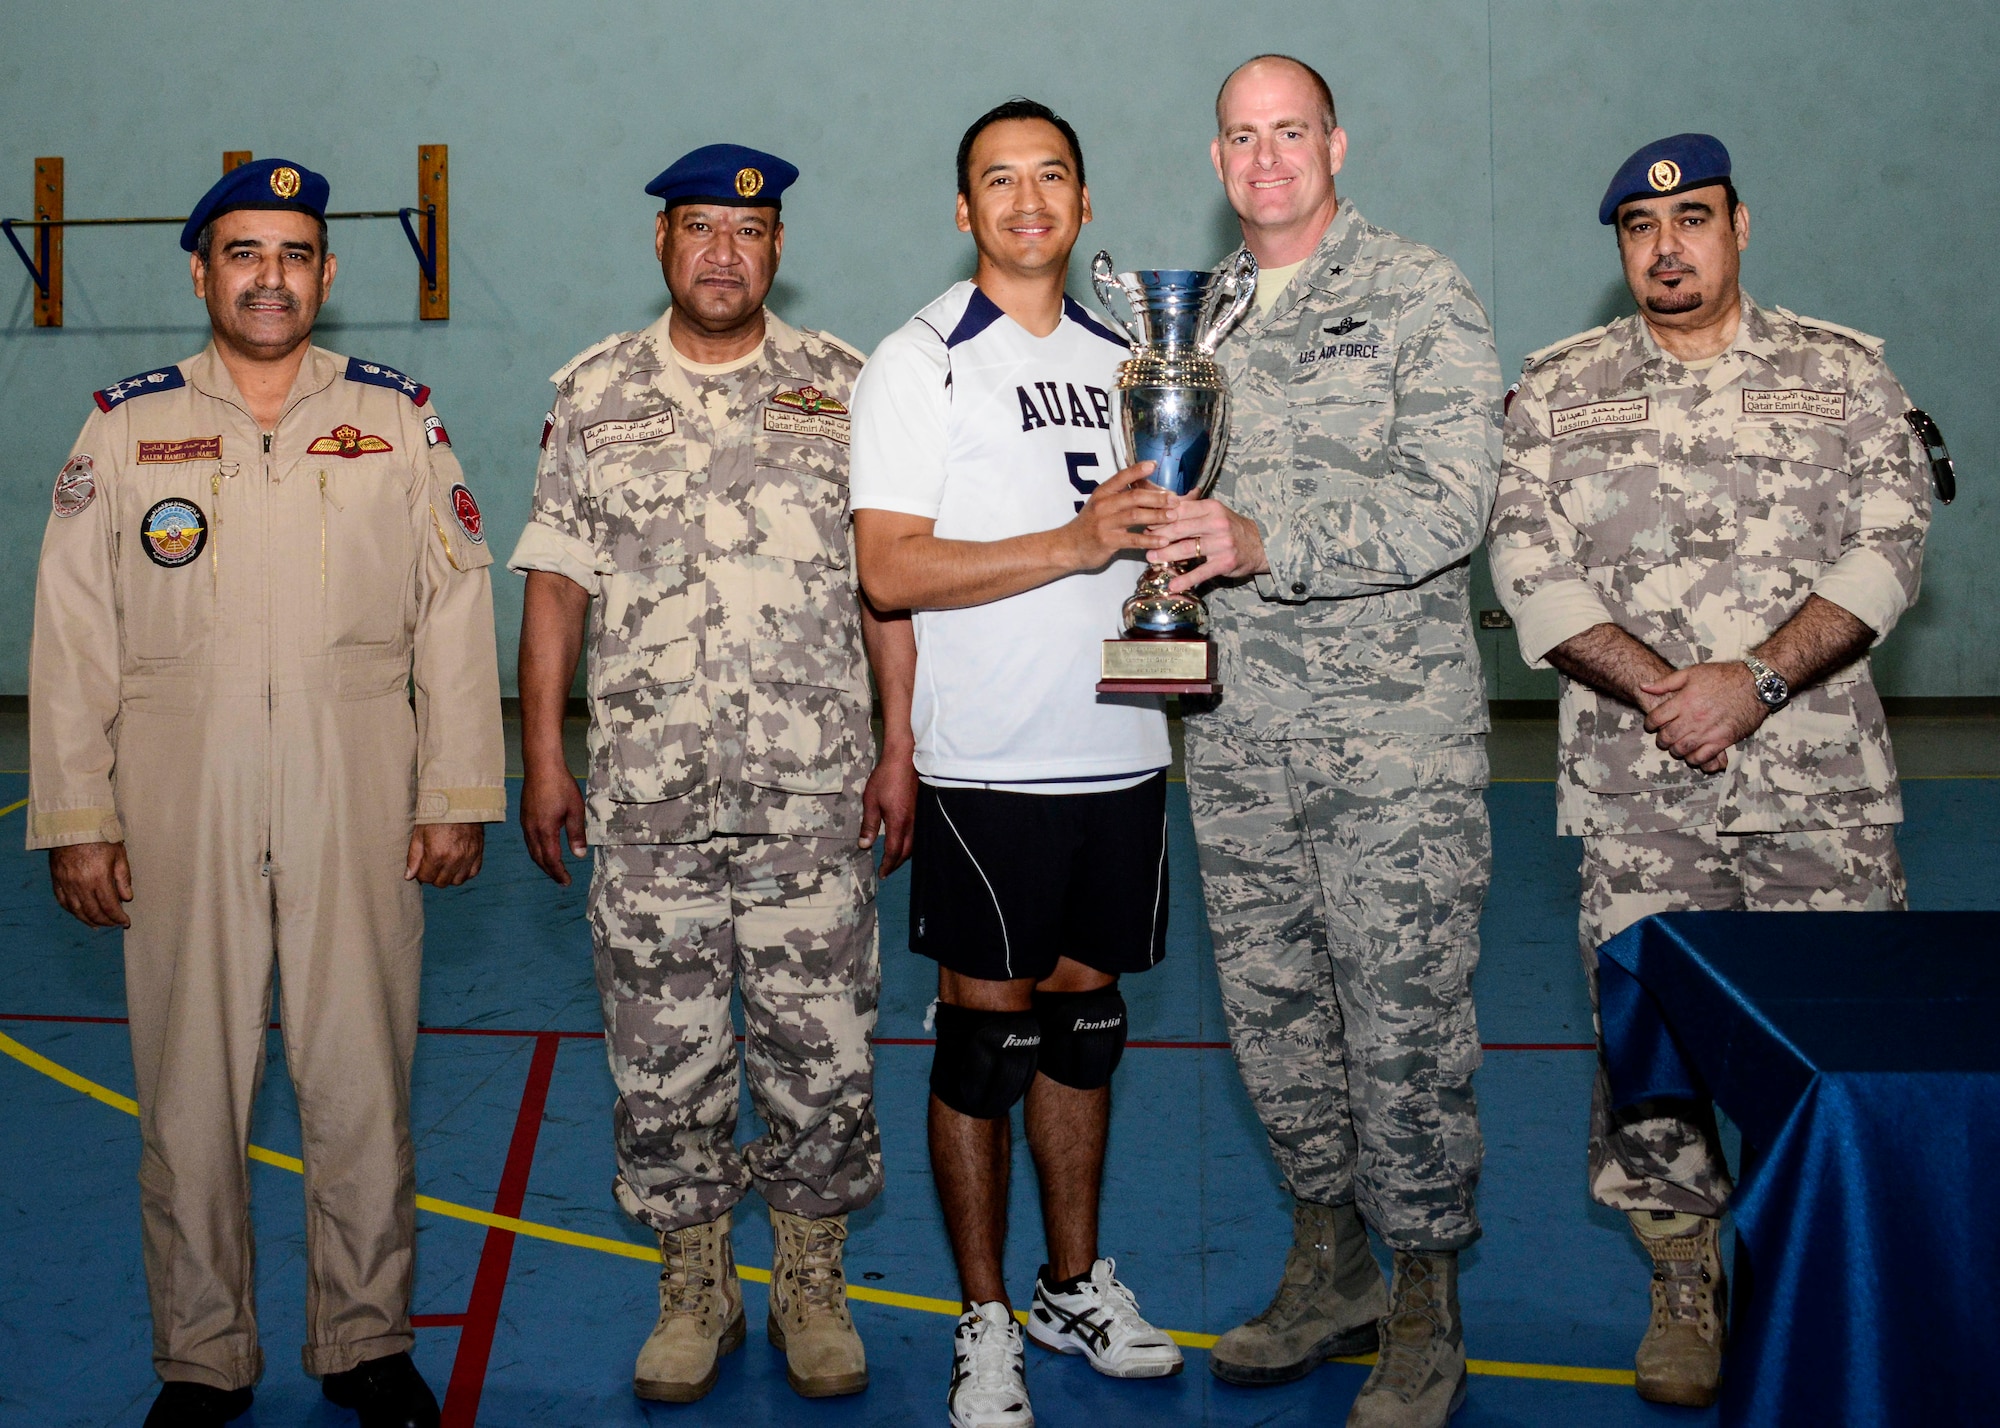 Brig. Gen. Darren James, 379th Air Expeditionary Wing commander, along with Qatar Emiri Air Force leadership present the championship trophy to Staff Sgt. William Sanchez, volleyball team captain, for winning the volleyball tournament hosted by the QEAF June 2, 2016, at Al Udeid Air Base, Qatar. The QEAF hosted the volleyball tournament as a means of having fun while strengthening and building the partnership and friendship between the service members. (U.S. Air Force photo/Senior Airman Janelle Patiño/Released)